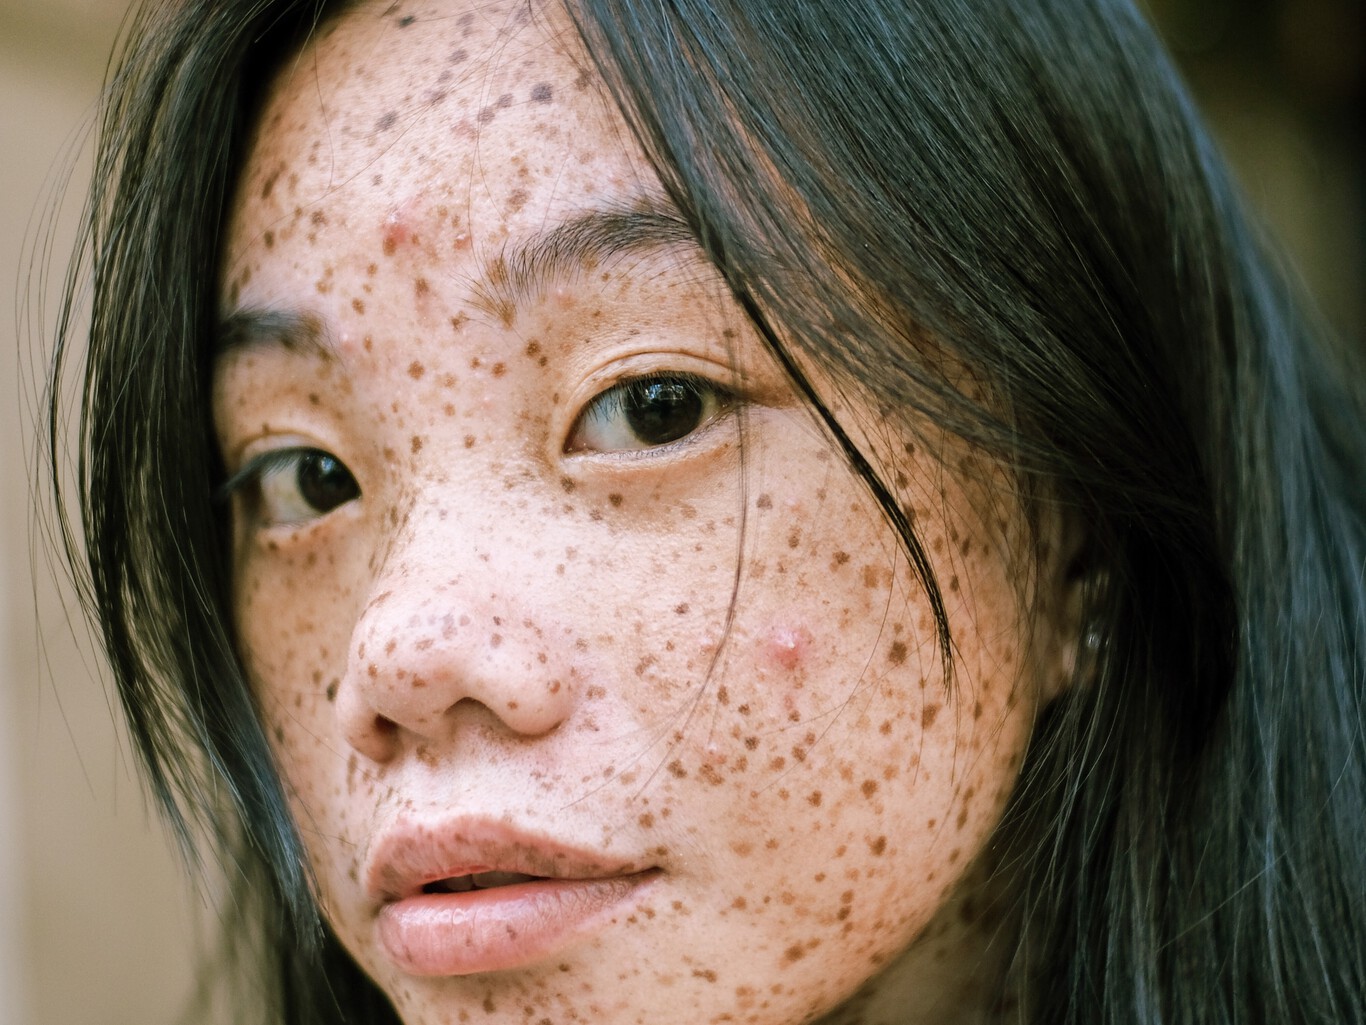 Nobody is born with freckles. The science behind these characteristic spots